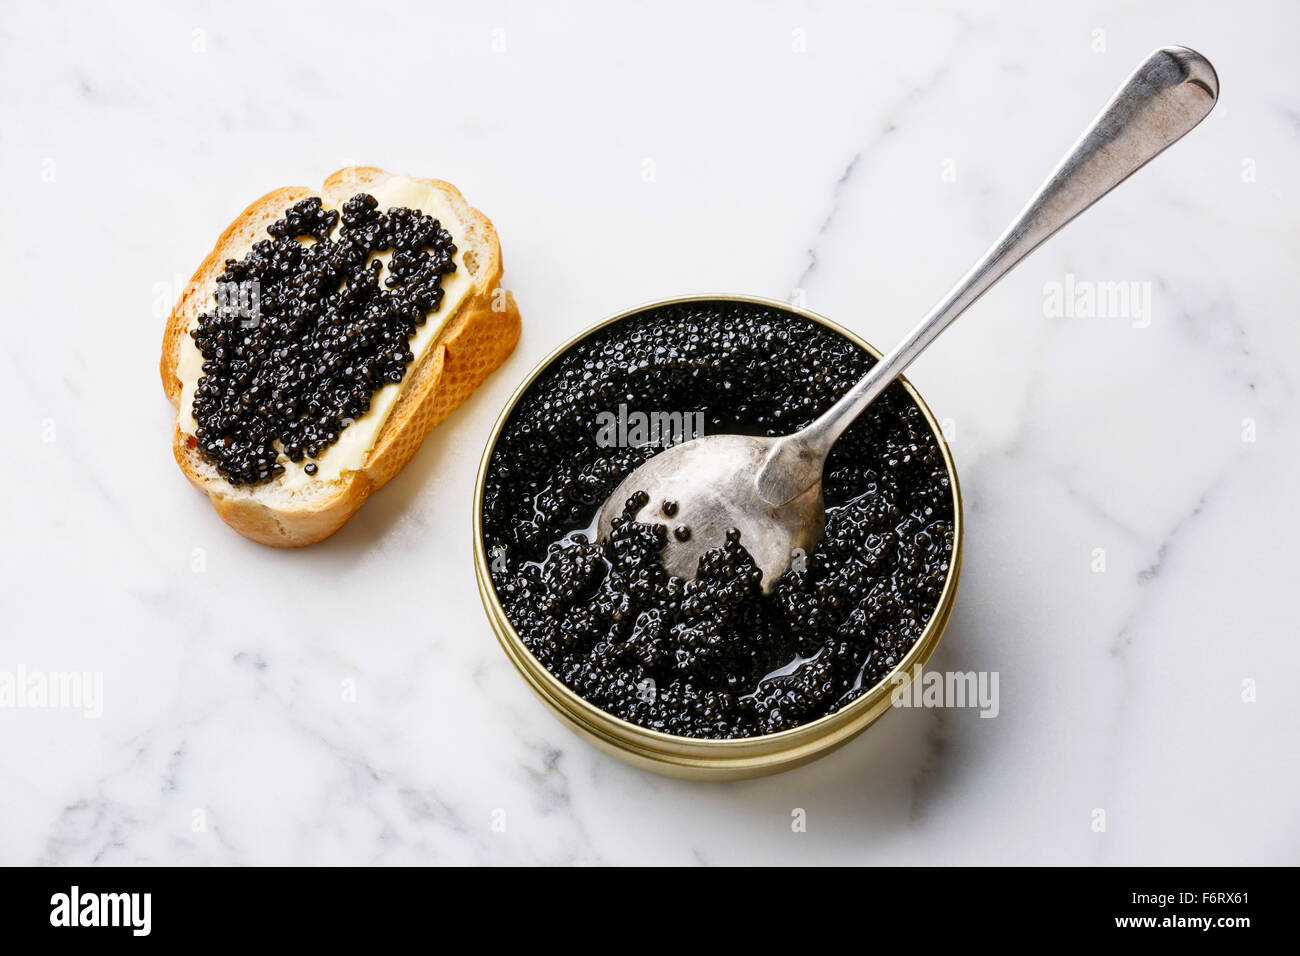 Sturgeon black caviar in can and sandwich on white marble background Stock Photo